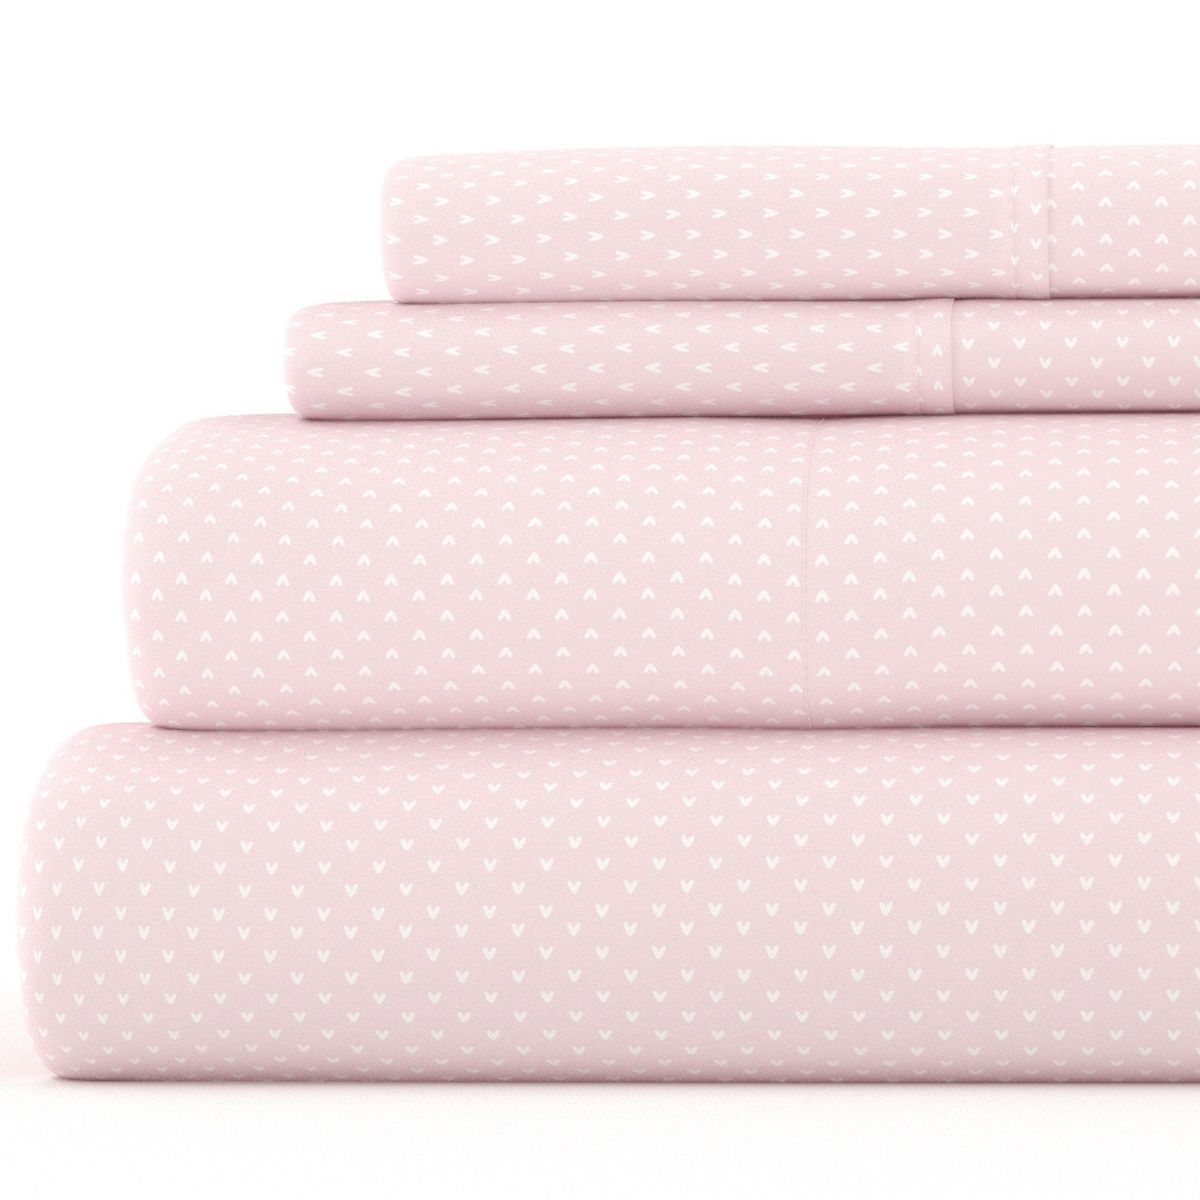 Printed Patterns 4PC Sheet Set - Extra Soft, Easy Care - Becky Cameron | Target